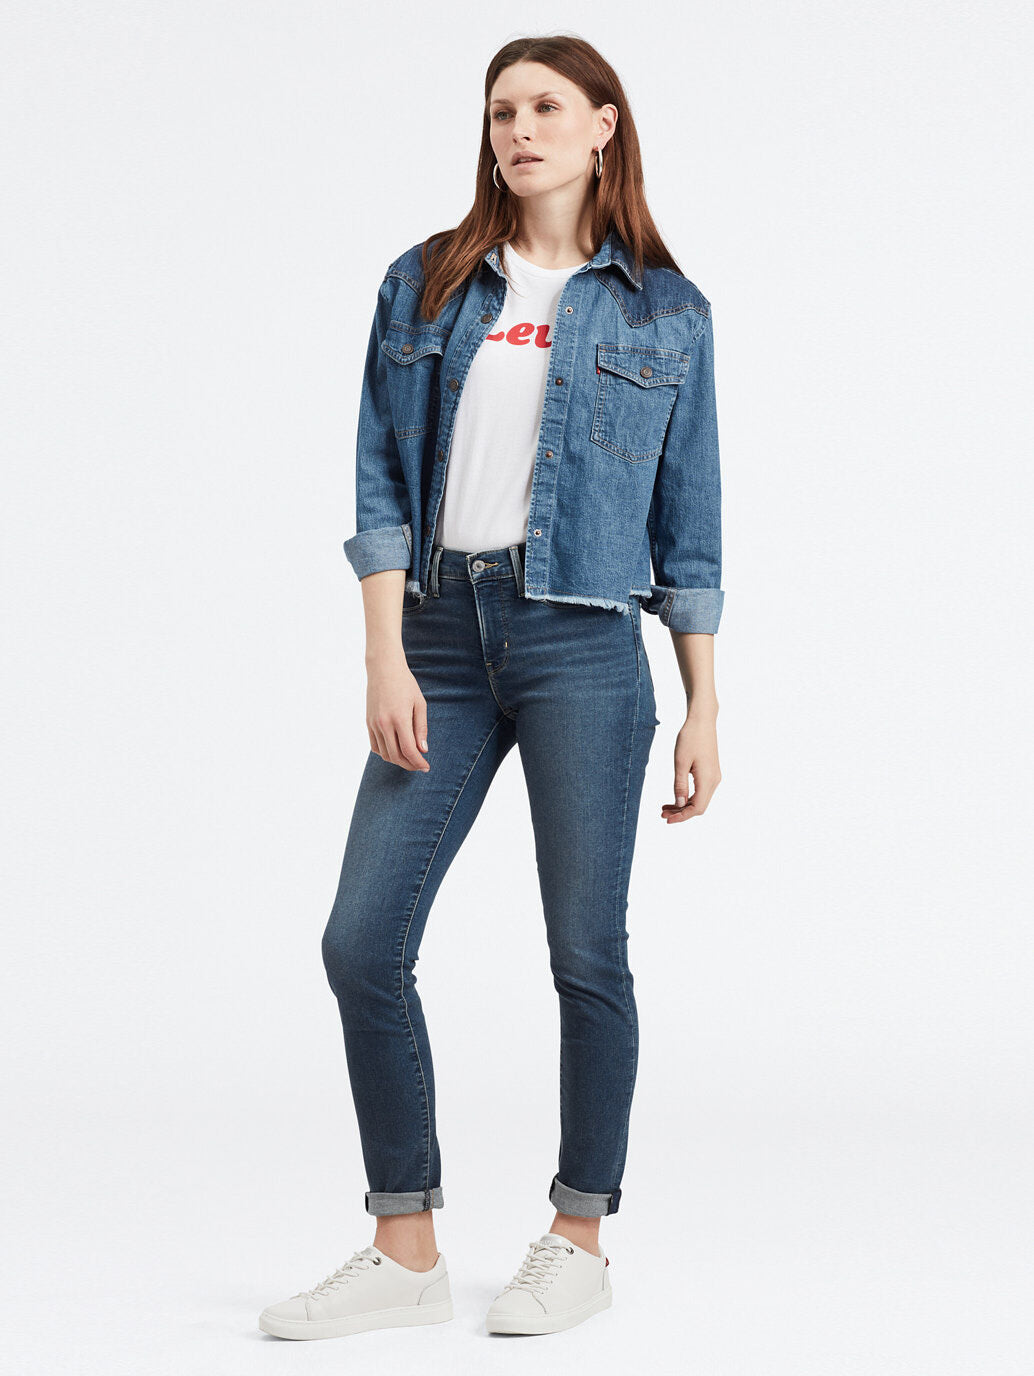 Skinny jeans from Levi's, size 30